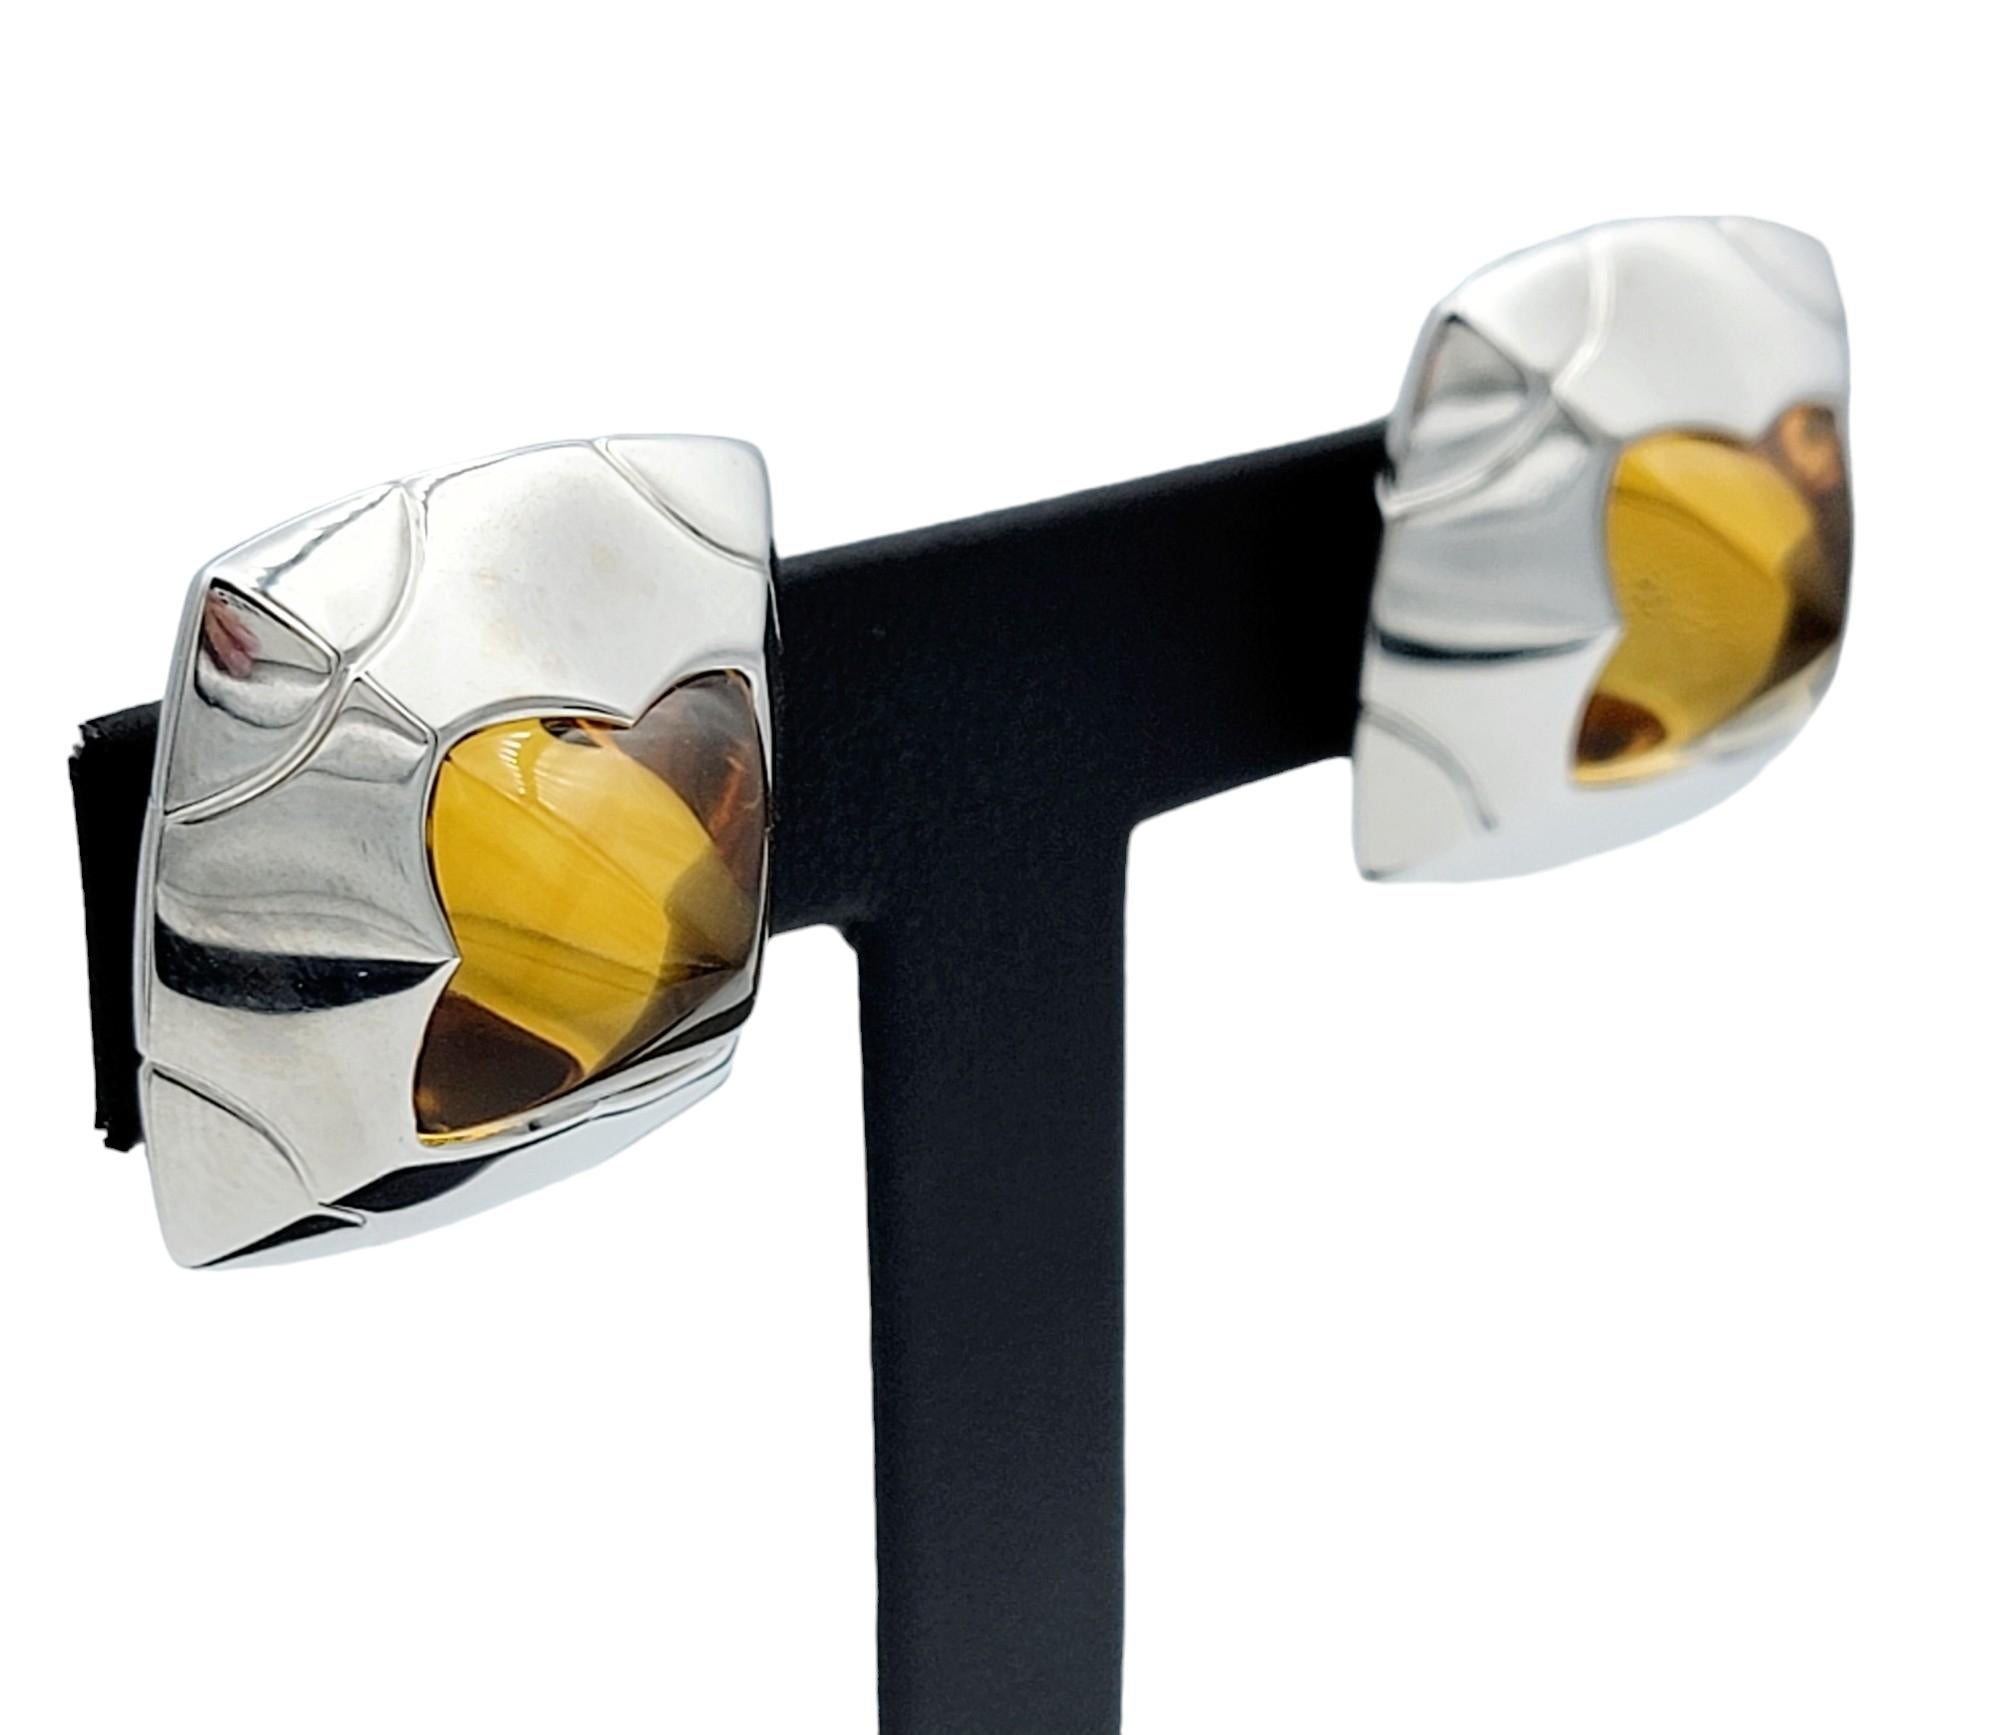 Bvlgari Pyramid Citrine Non-Pierced Stud Style Earrings in 18 Karat White Gold For Sale 3